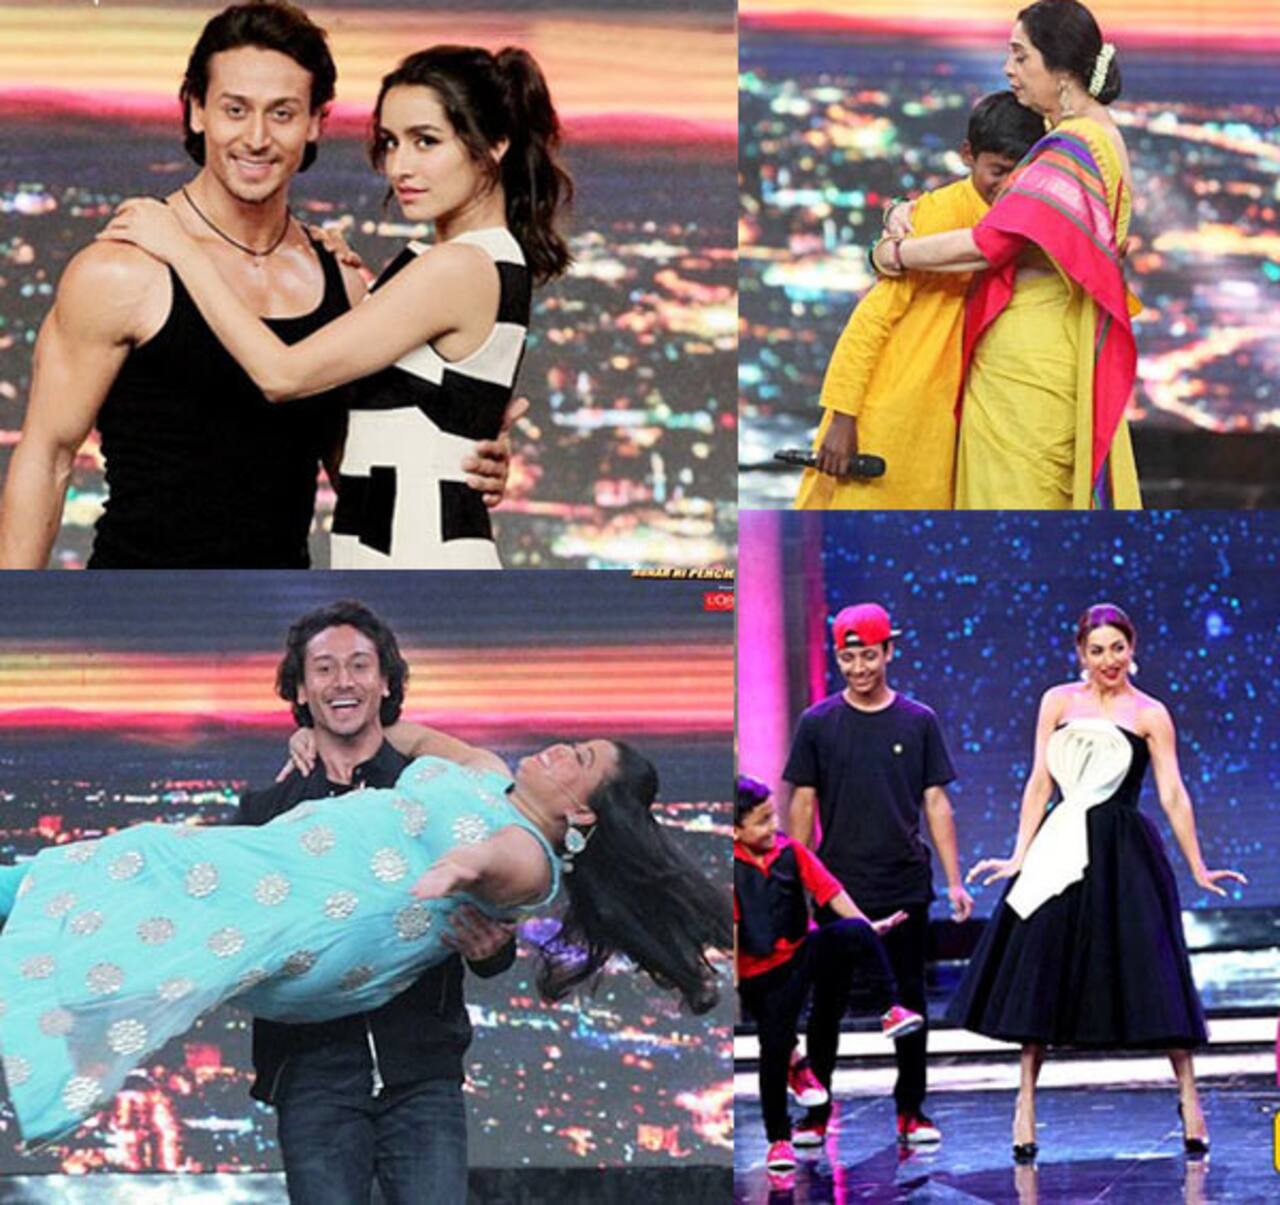 BARC Ratings Week 18: India’s Got Talent fares BETTER than The Kapil Sharma Show